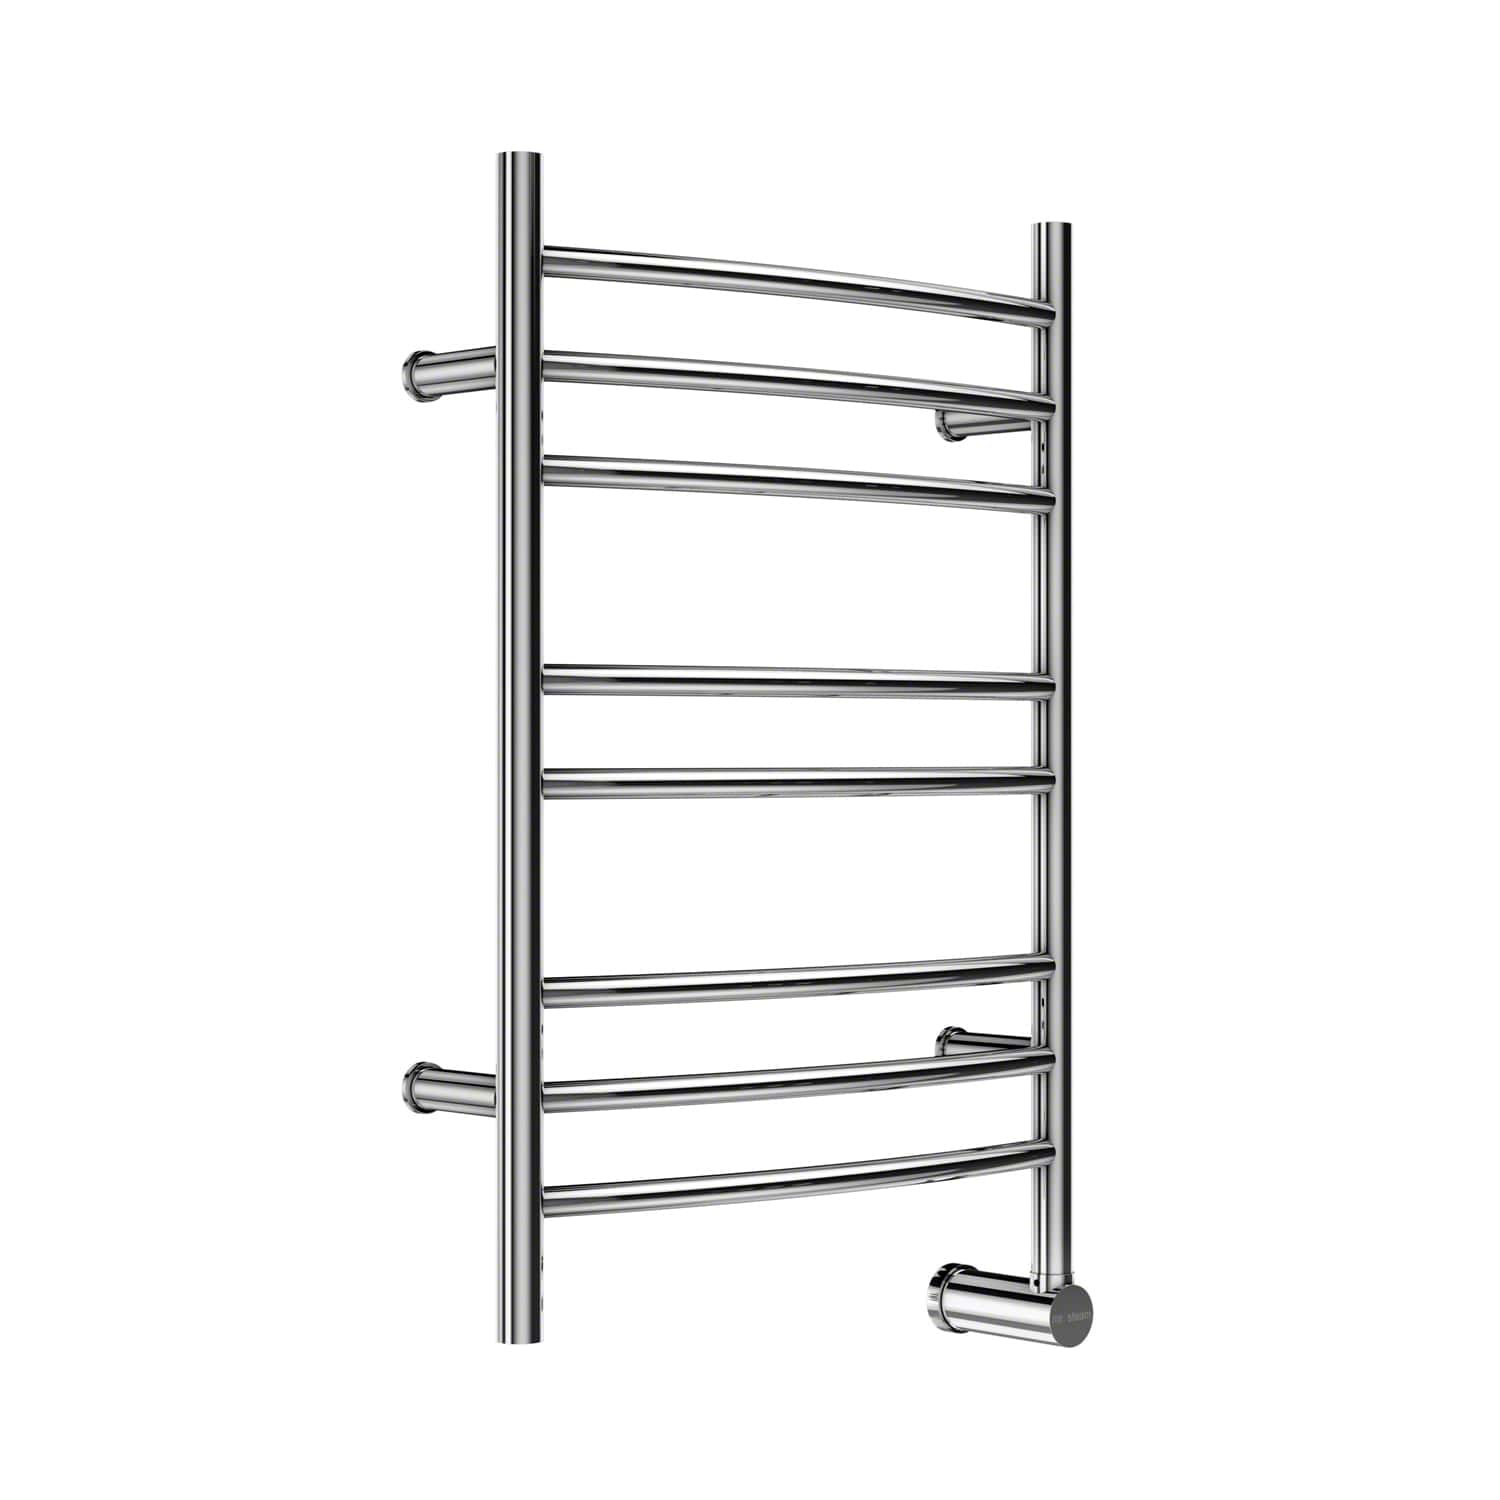 Mr. Steam Metro Collection® 8-Bar Wall-Mounted Electric Towel Warmer with Digital Timer in Stainless Steel Polished